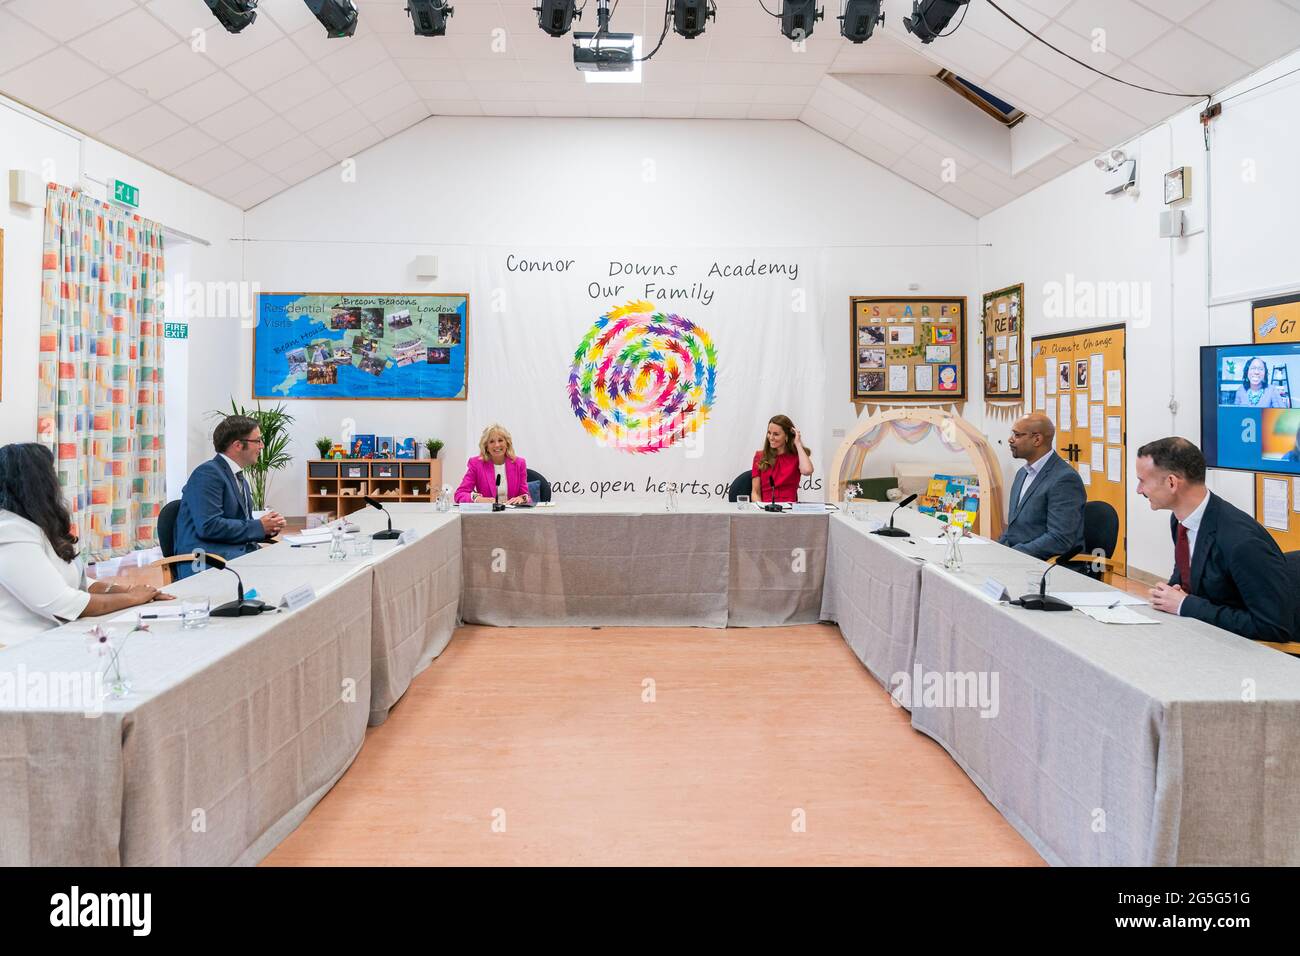 U.S First Lady Jill Biden and Catherine, the Duchess of Cambridge, join in a roundtable discussion on education at Connor Downs Academy  June 11, 2021 in Hayle, Cornwall, United Kingdom. Stock Photo